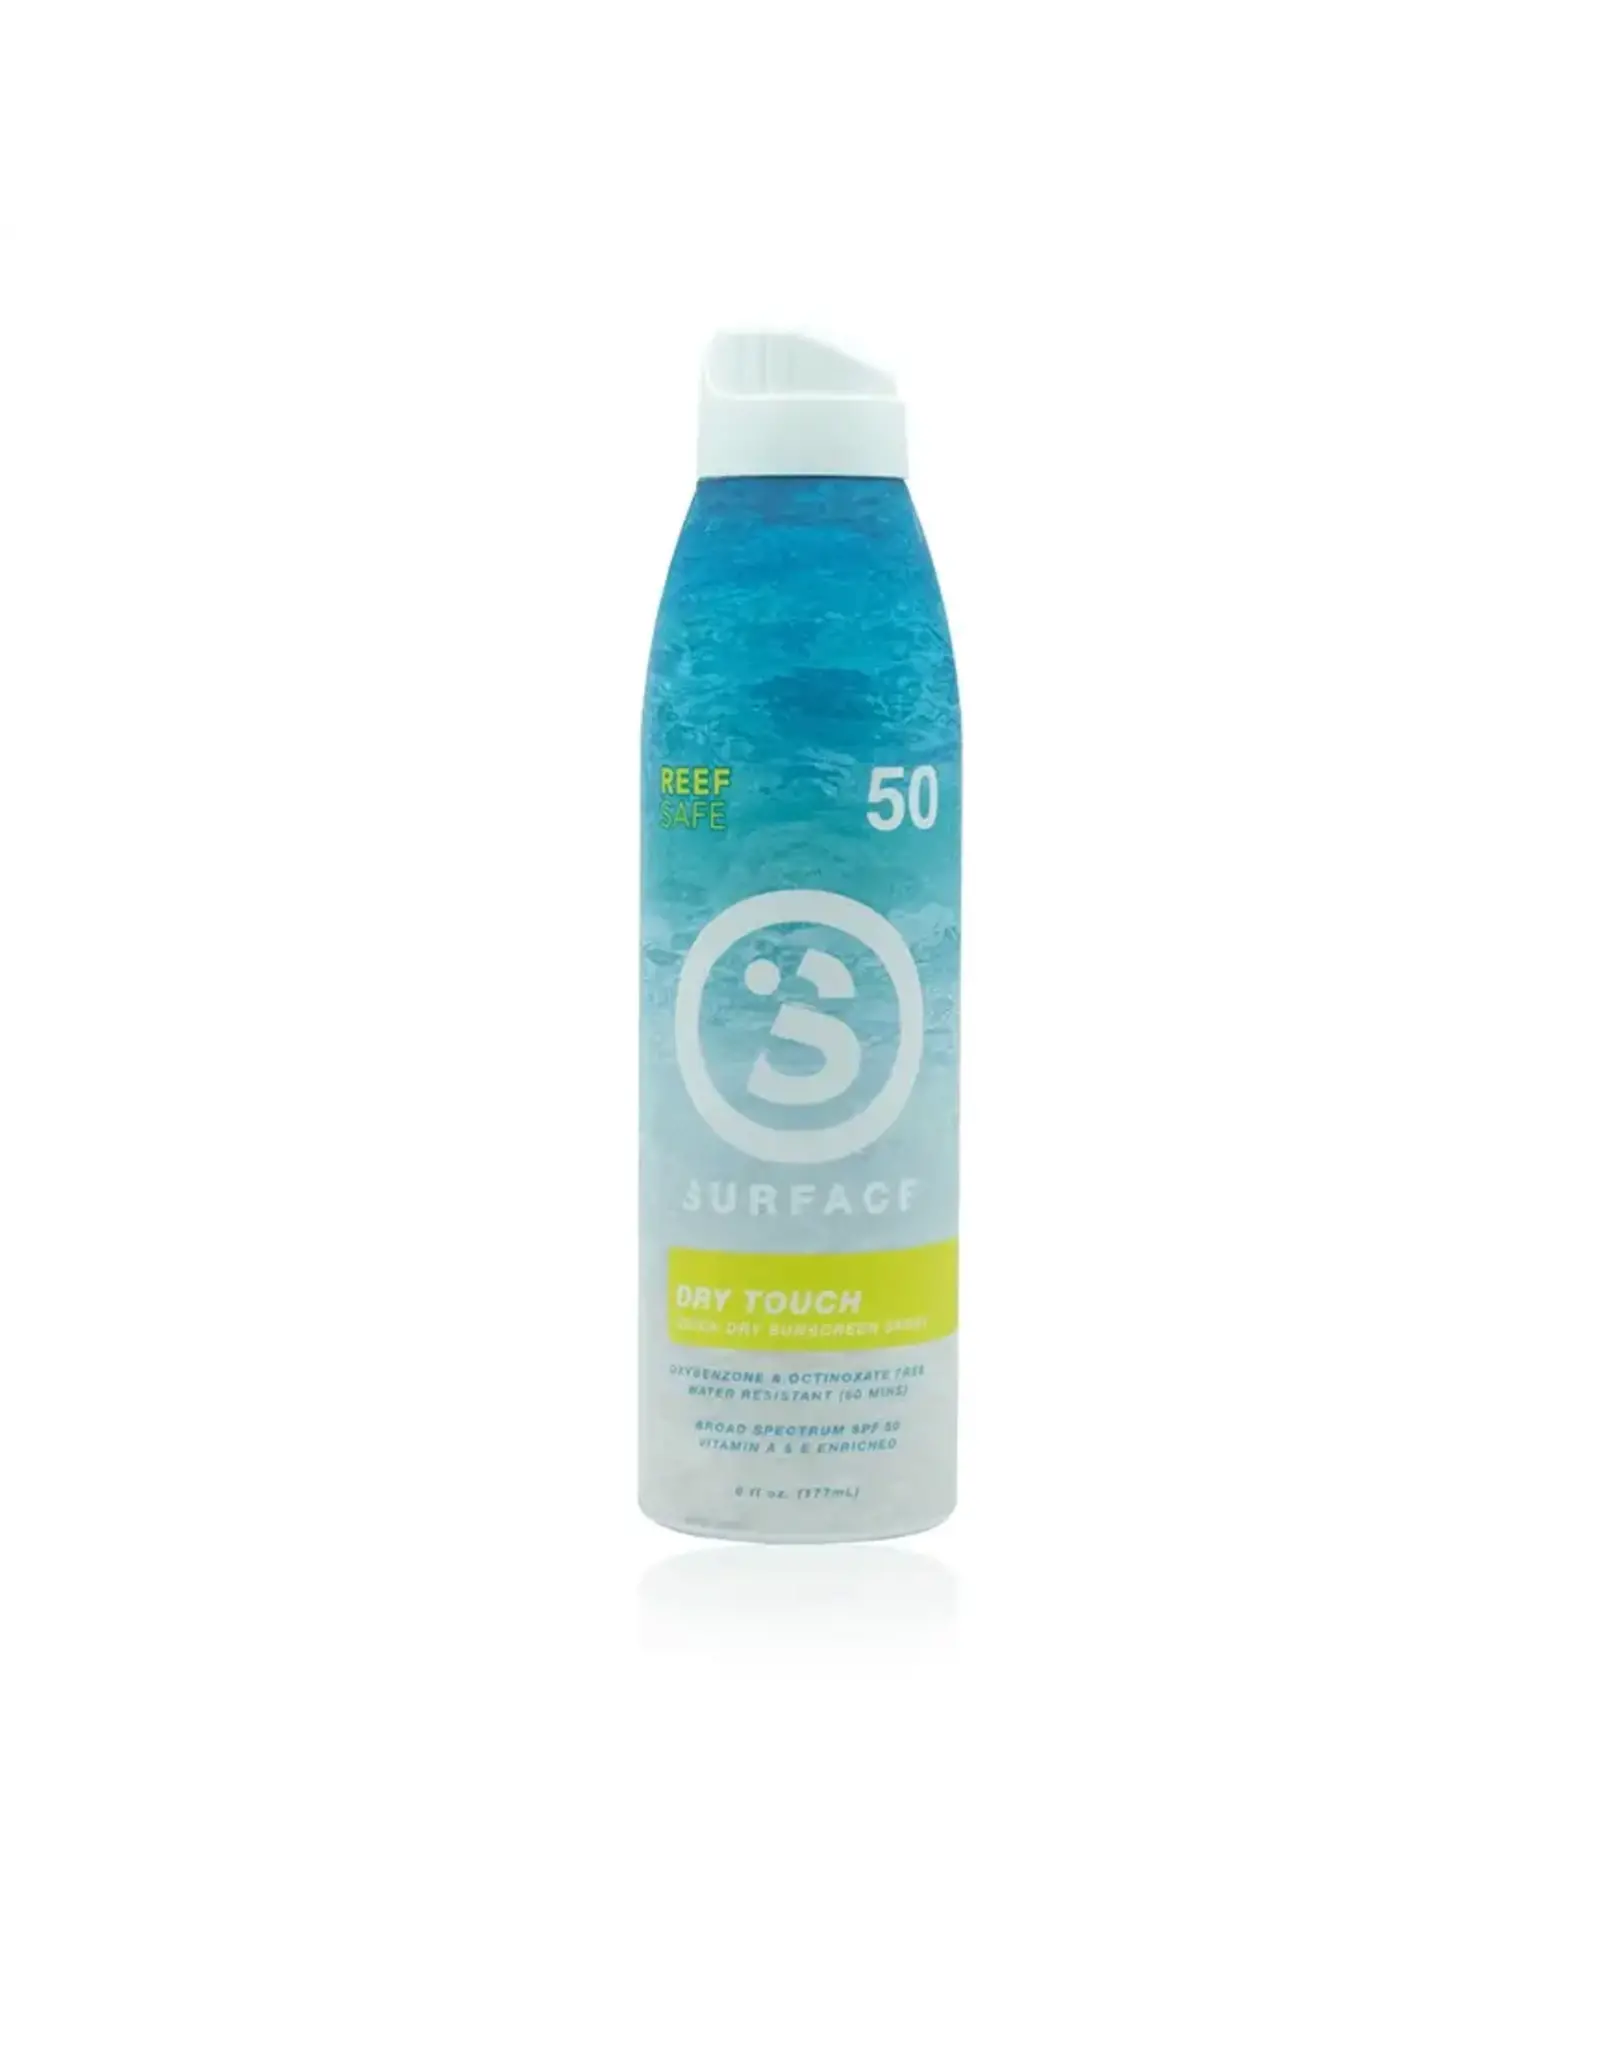 Surface Sunscreen Dry Touch Spray Fragrance Free SPF50 6oz